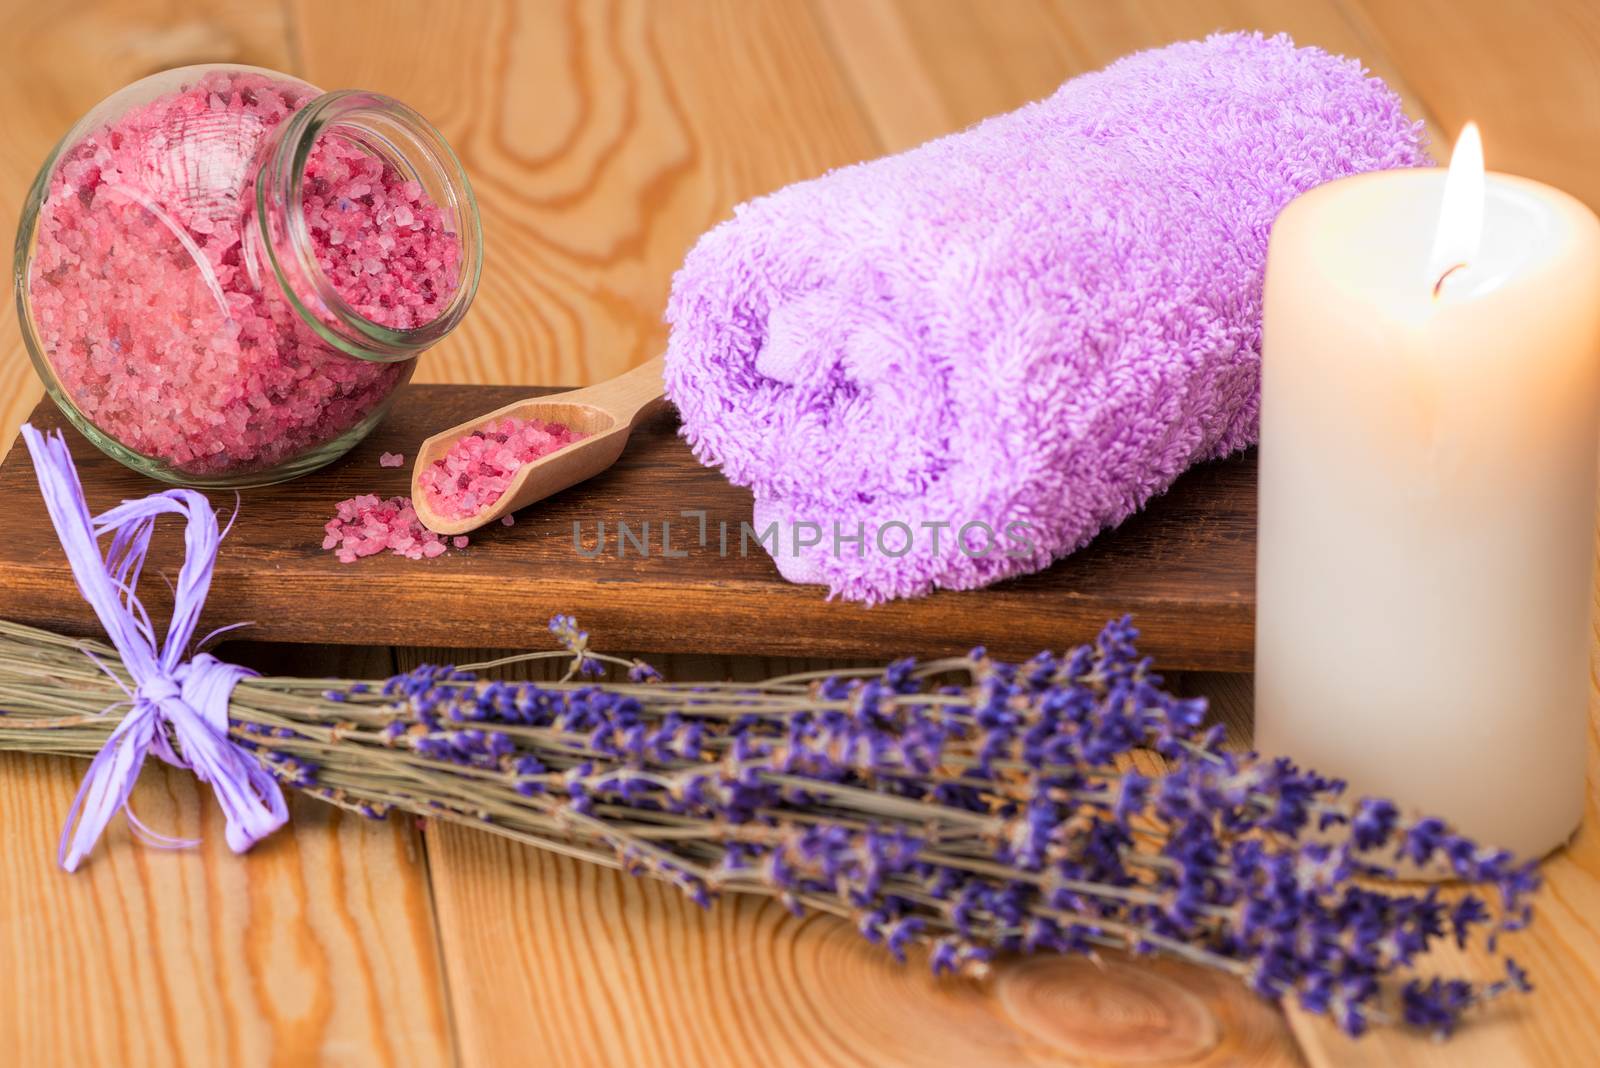 burning candle, towel and sea salt with lavender close-up objects for spa treatment